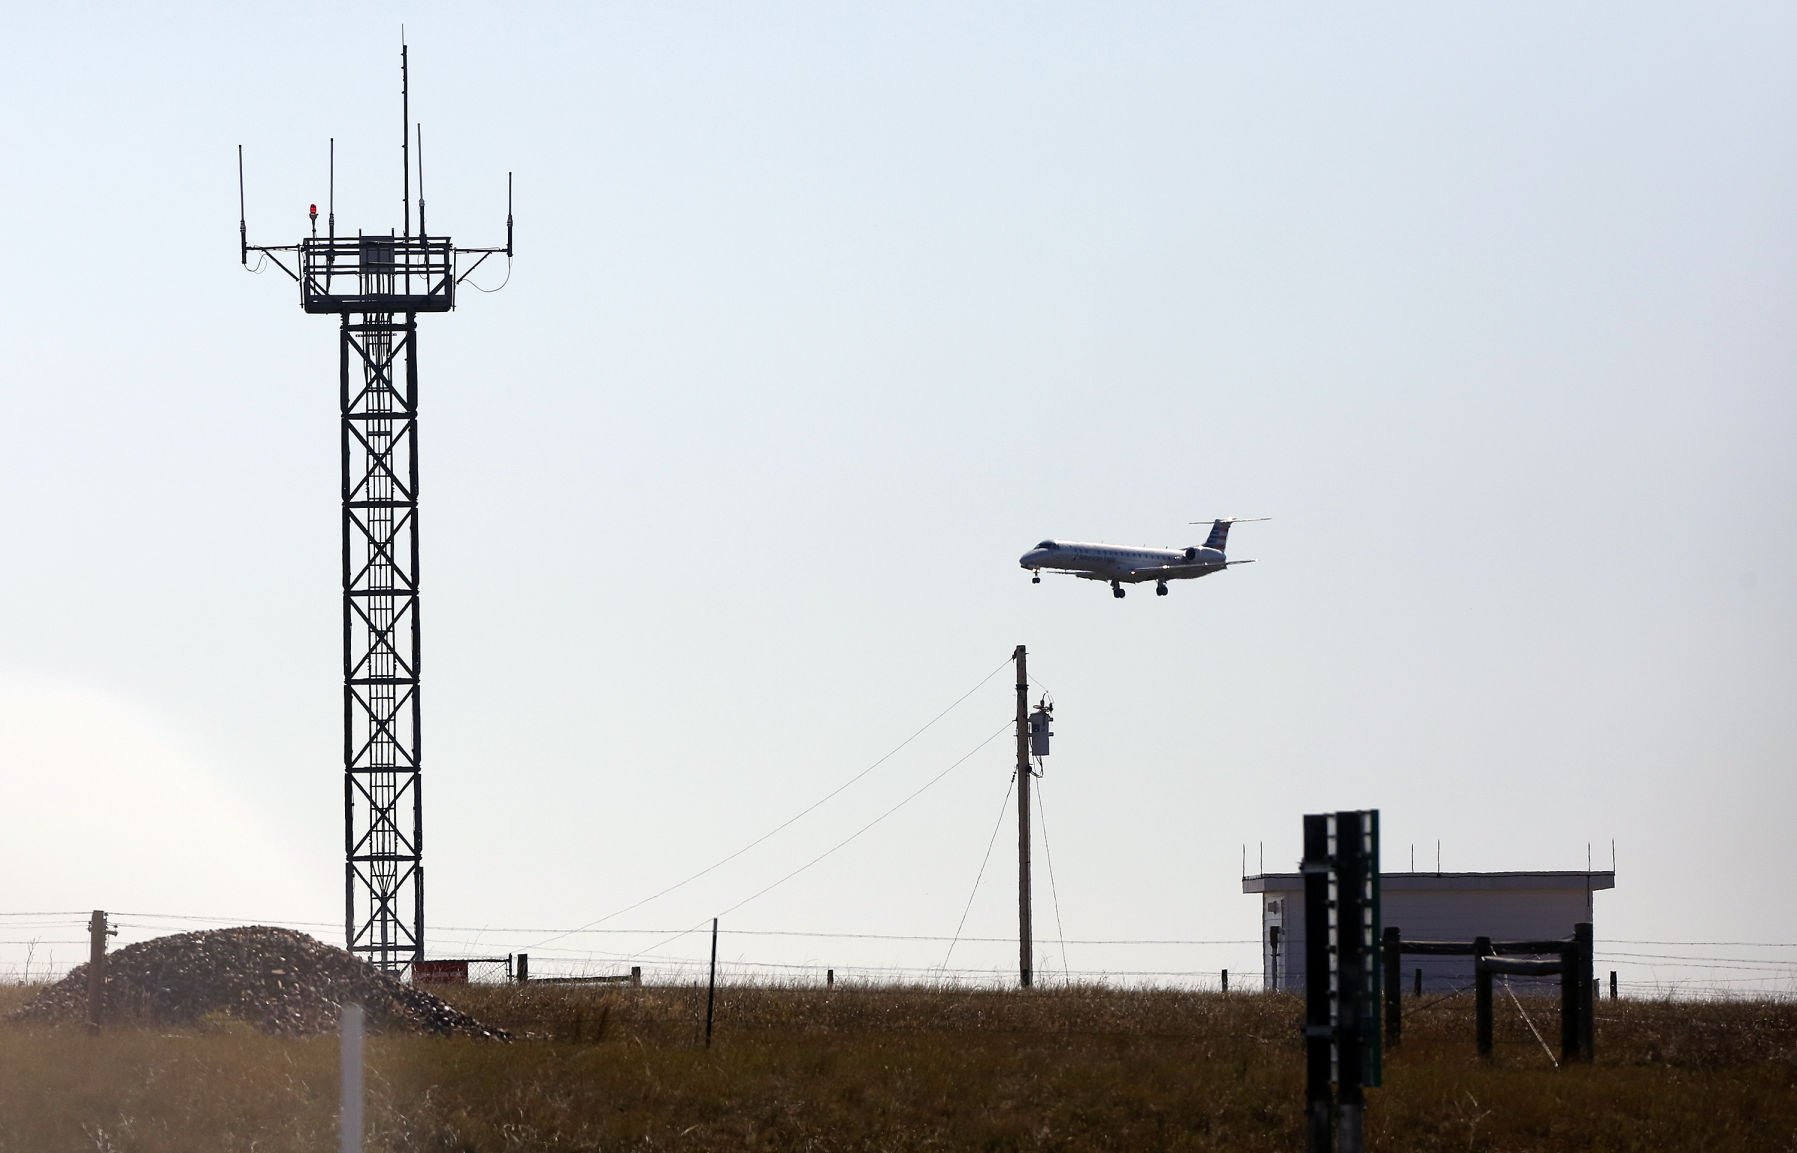 how many fly in and out of the rapid city regional airport per year